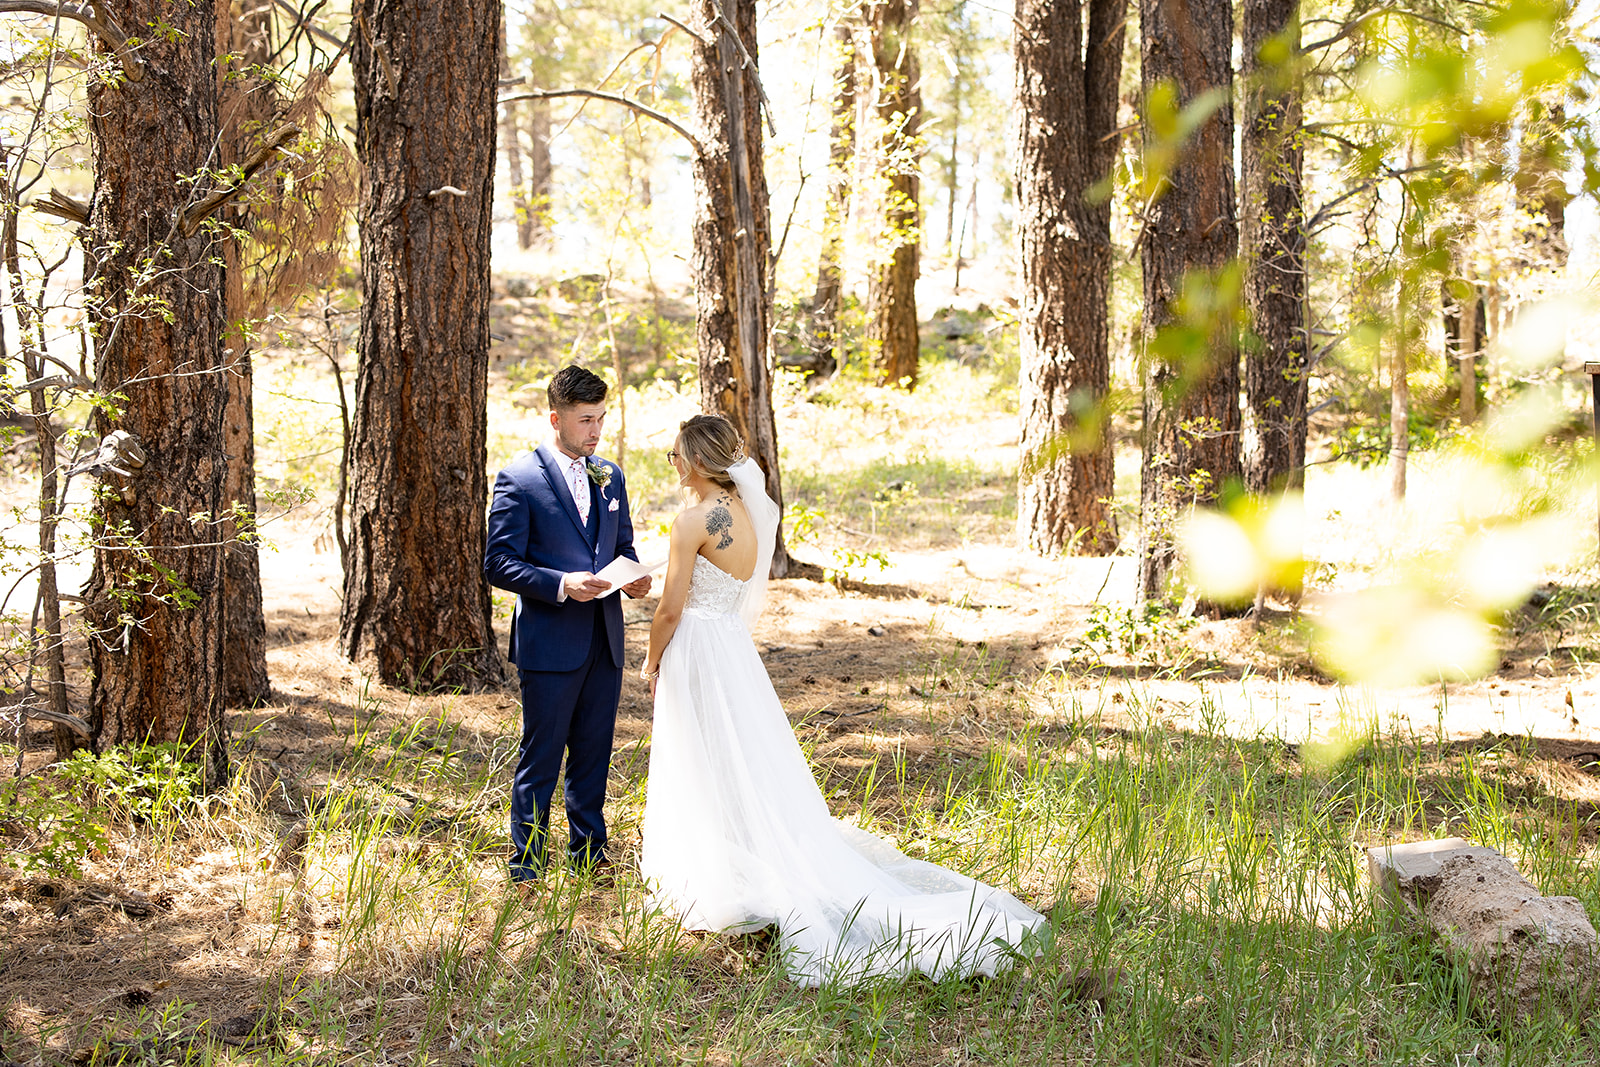 Private Wedding Vow Photography Session